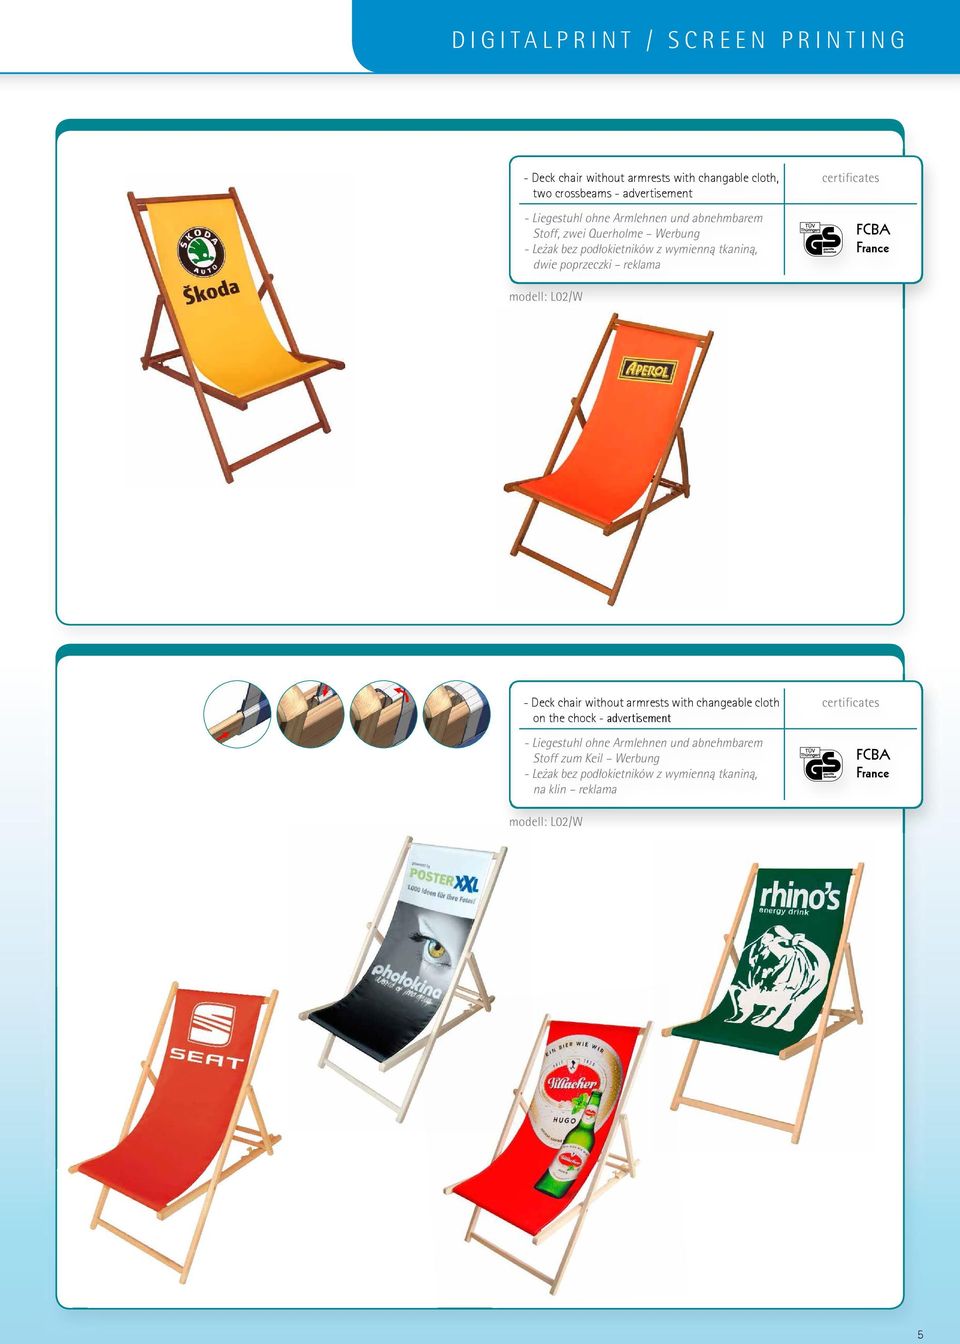 1 Instruction of assembling cloth in deck chair in deck chair with changeable cloth (new version) Step 1 Instruction of assembling cloth in deck chair in deck chair with changeable cloth (new